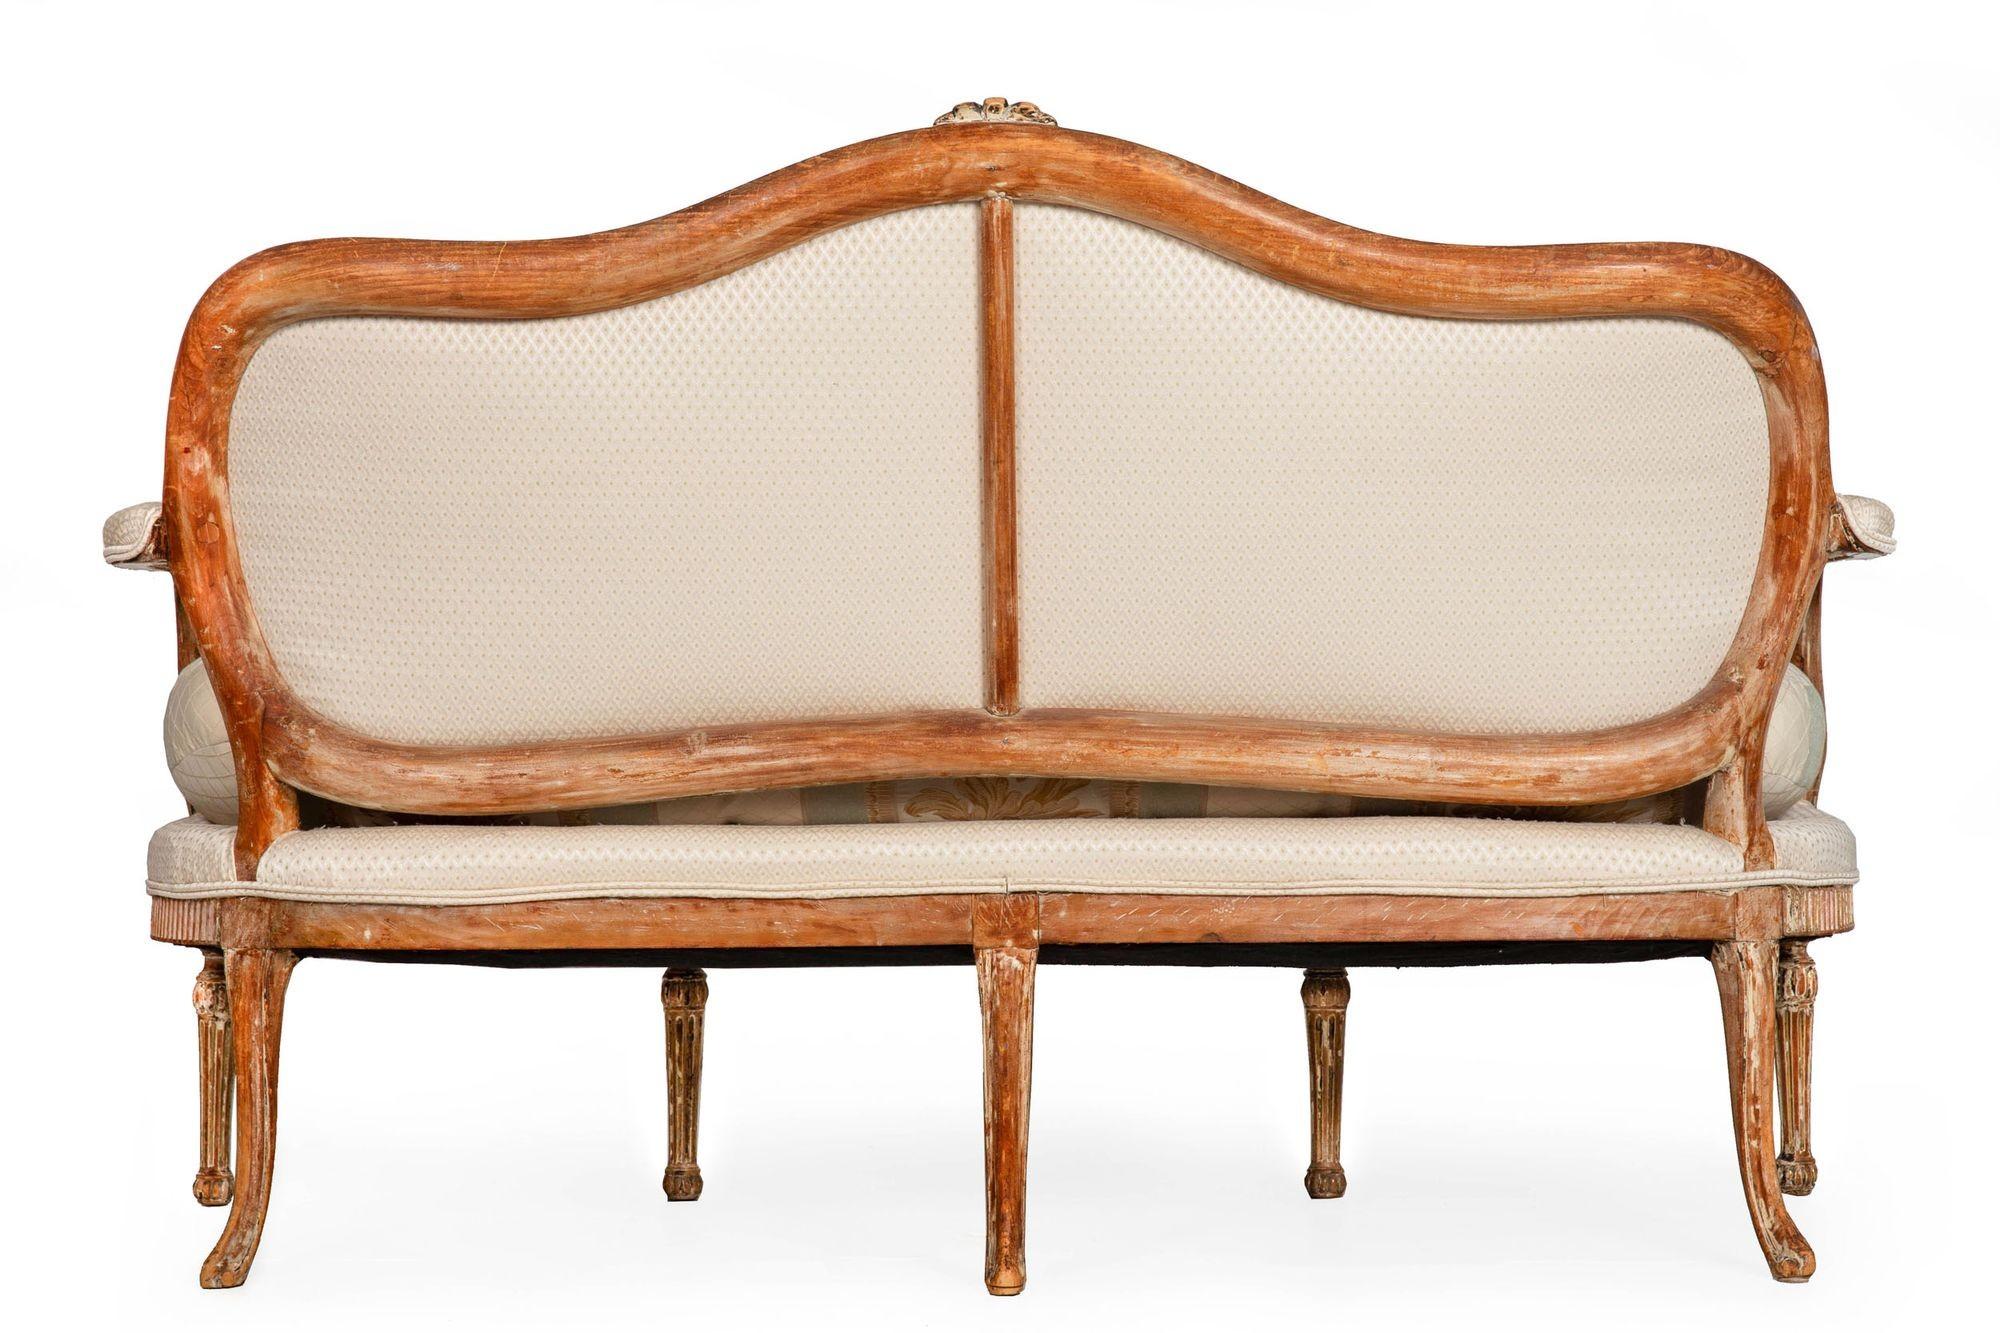 Circa 1780 Antique French Louis XVI Carved Settee Sofa Canapé In Good Condition For Sale In Shippensburg, PA